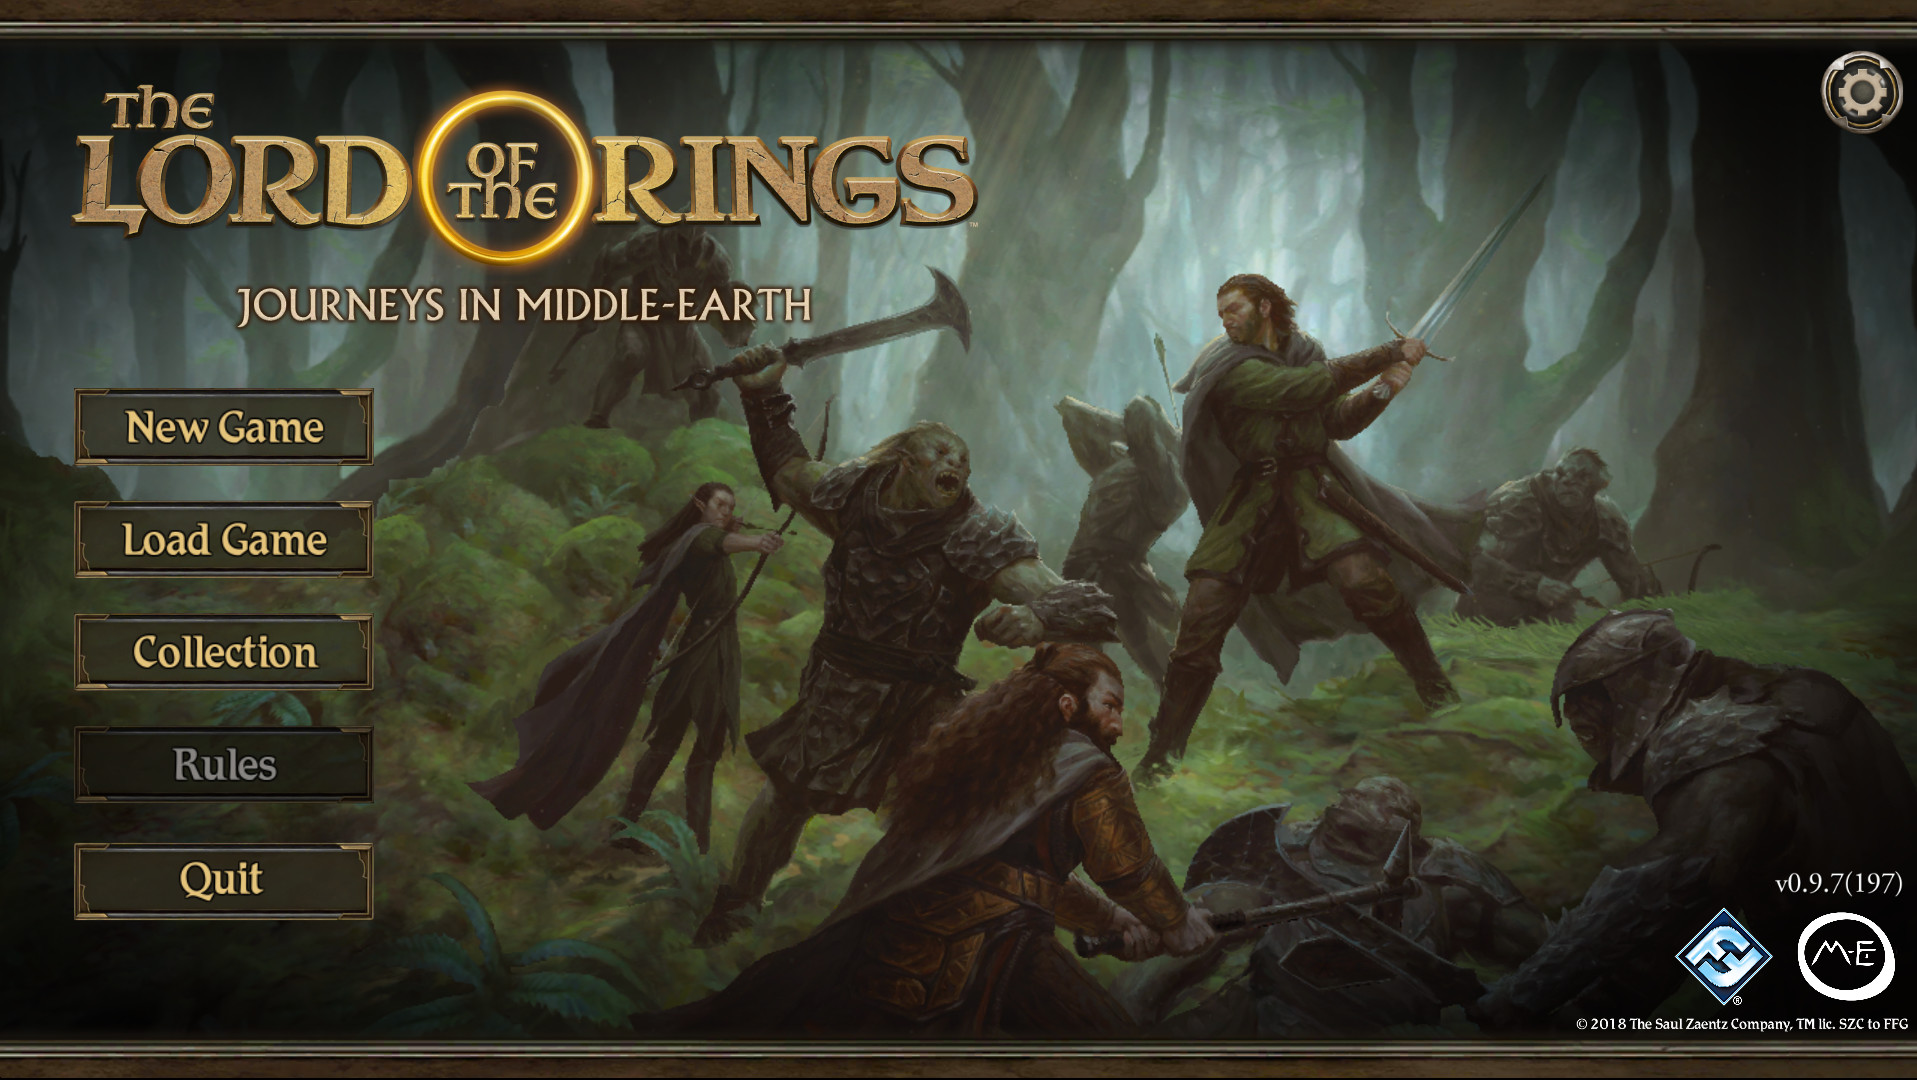 A New Lord Of The Rings Game Has Been Announced For PC